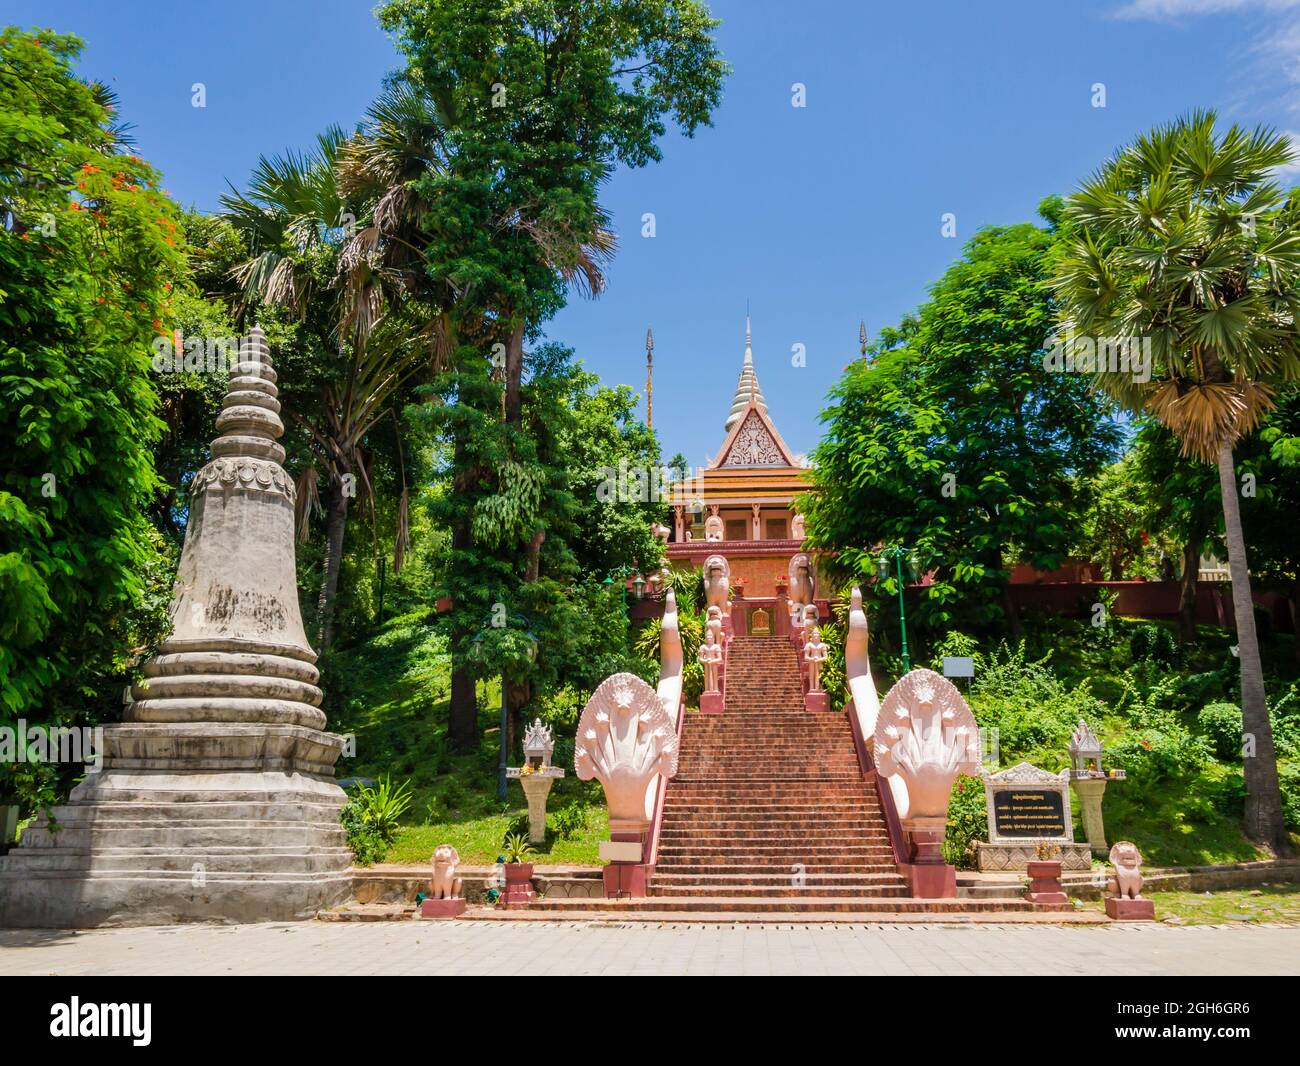 Stunning view of the main stairway with multi-headed snakes, leading to the Wat Phnom Pagoda, Phnom Penh, Cambodia Stock Photo